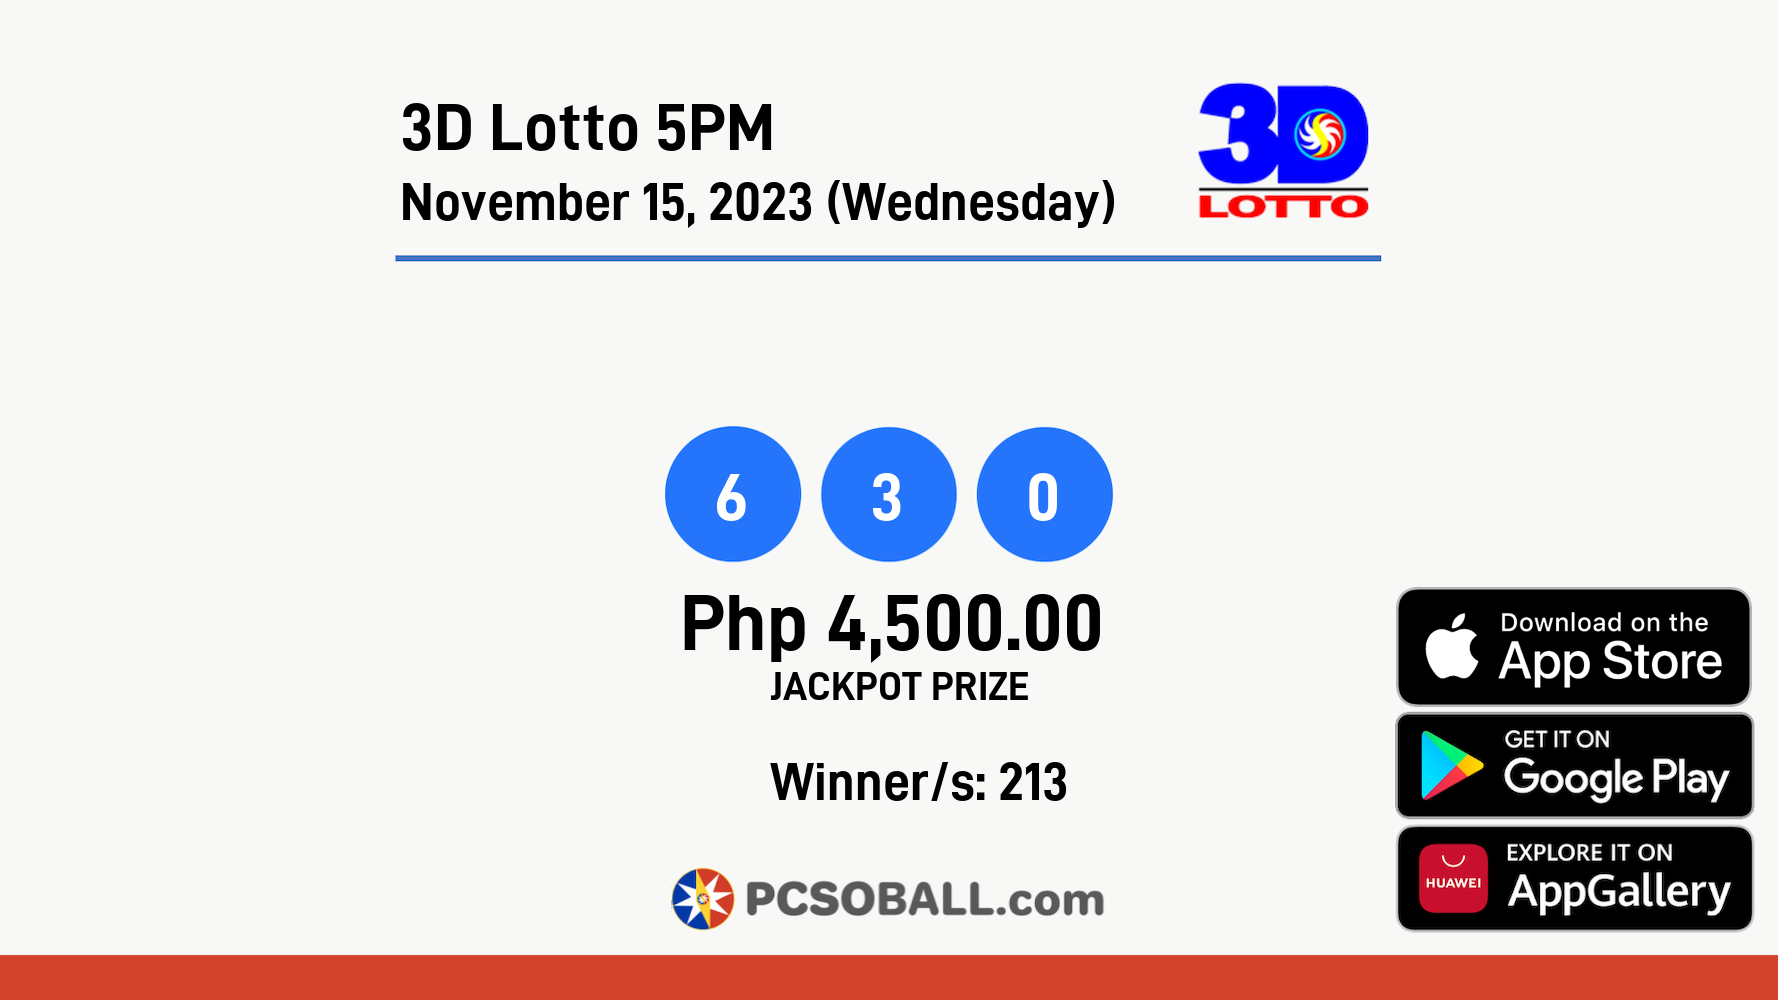 3D Lotto 5PM November 15, 2023 (Wednesday) Result